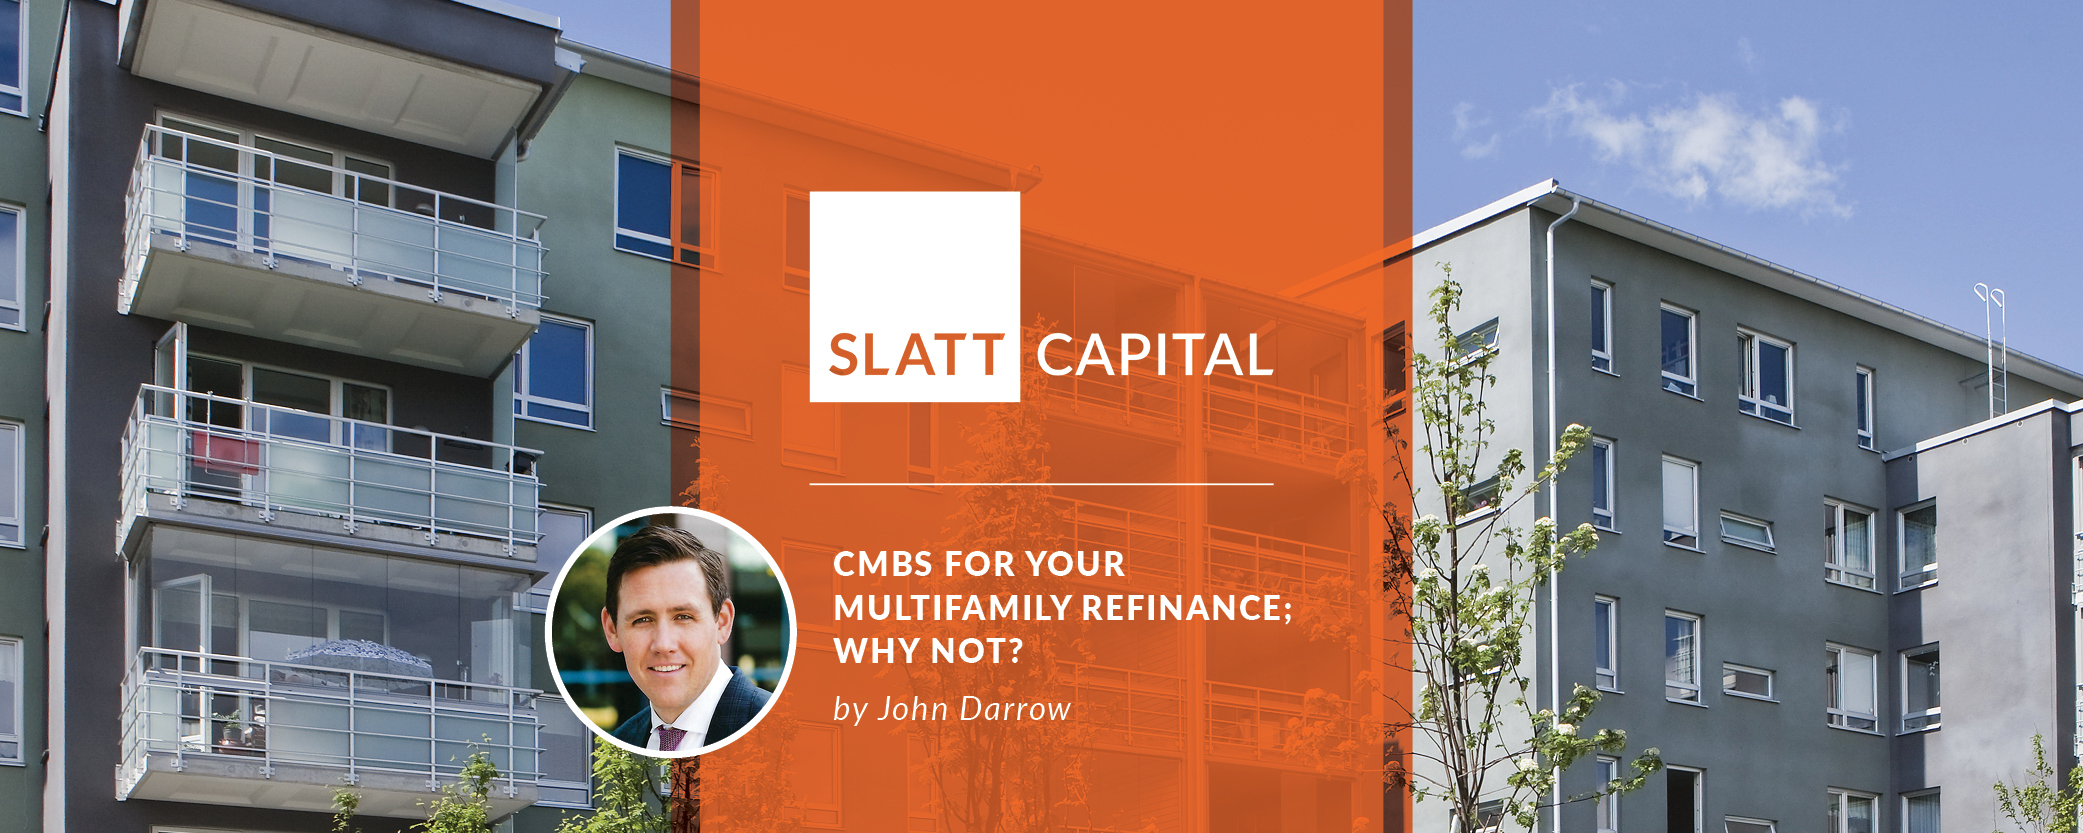 Cmbs for your multifamily refinance; why not?